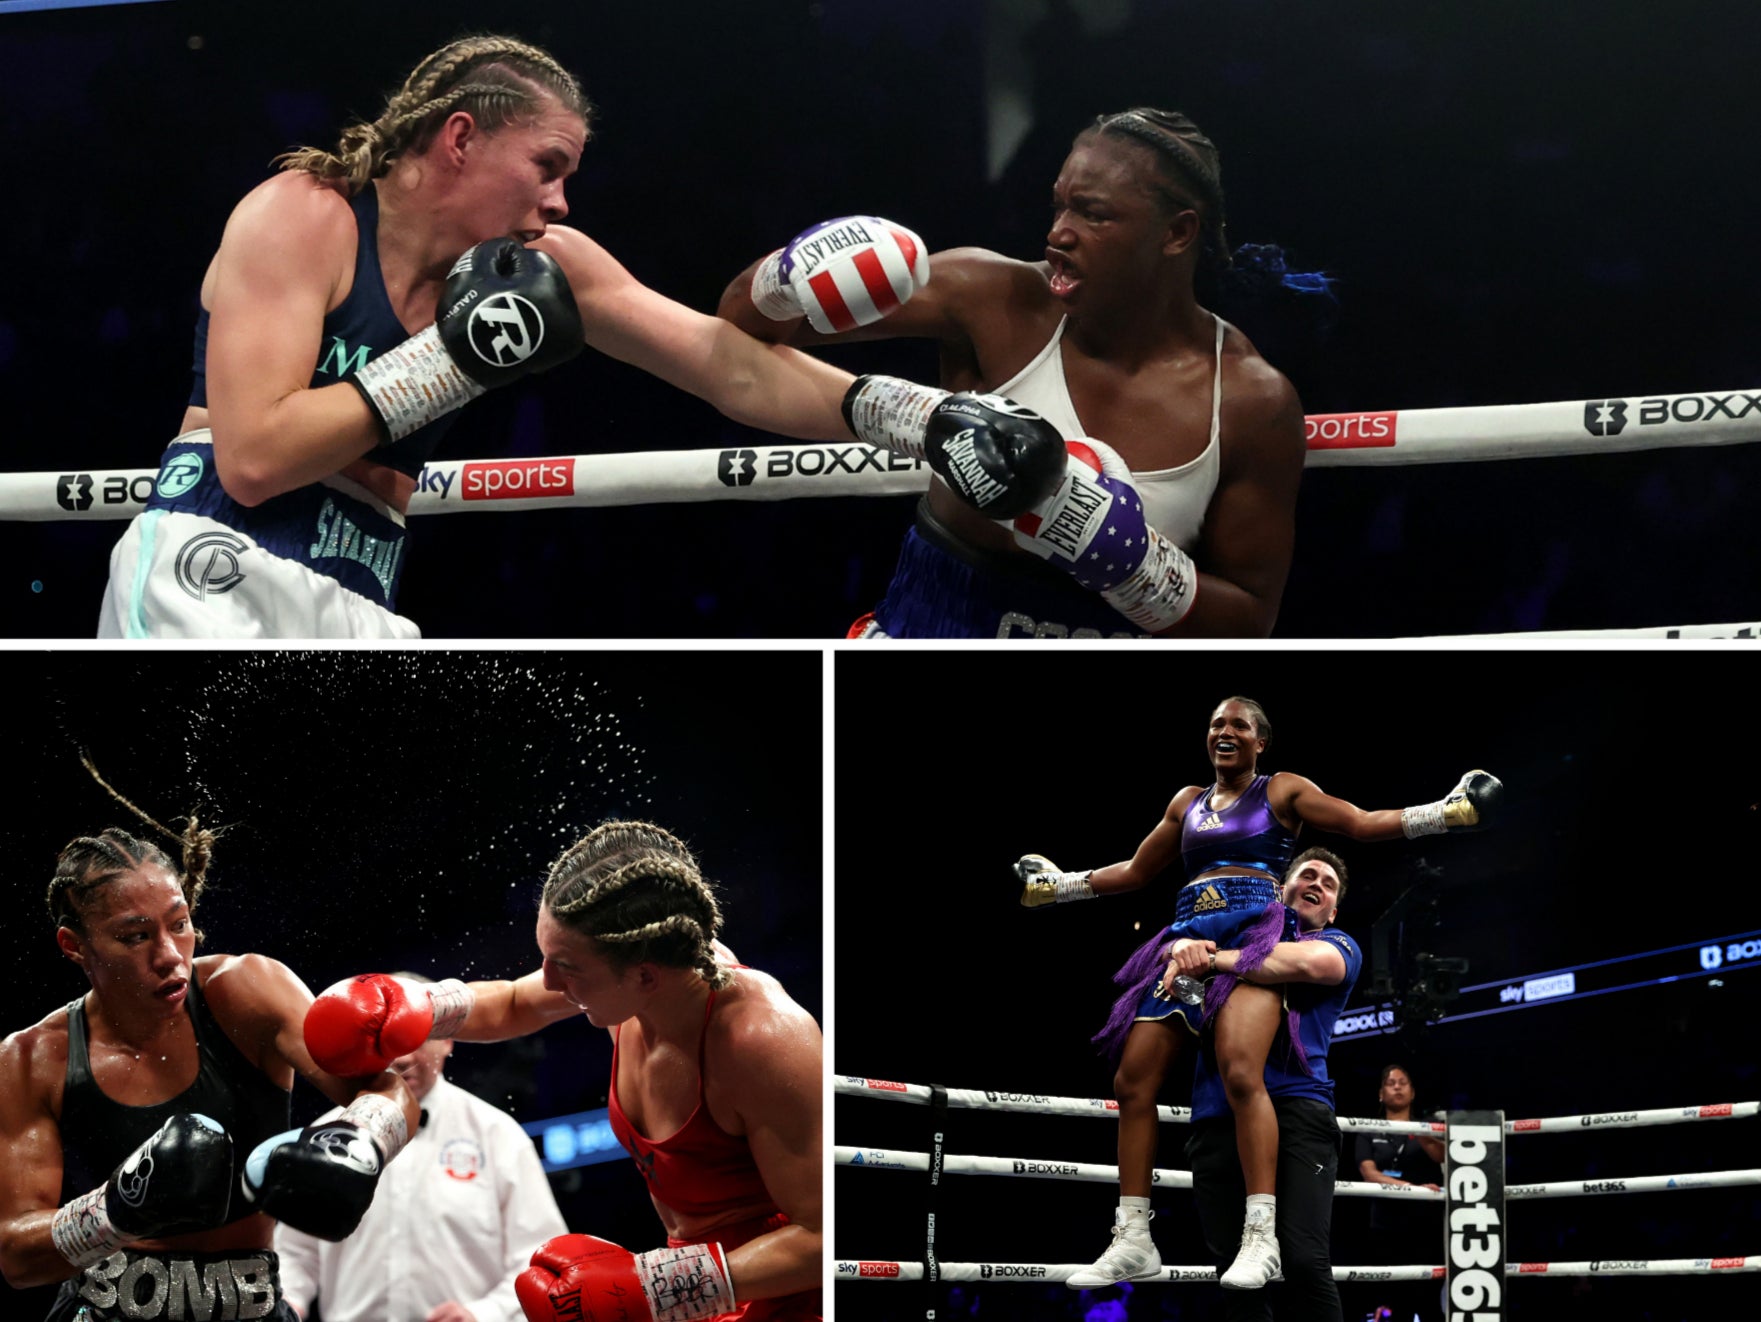 Shields vs Marshall topped an all-female card with support from Mayer vs Baumgardner and Caroline Dubois